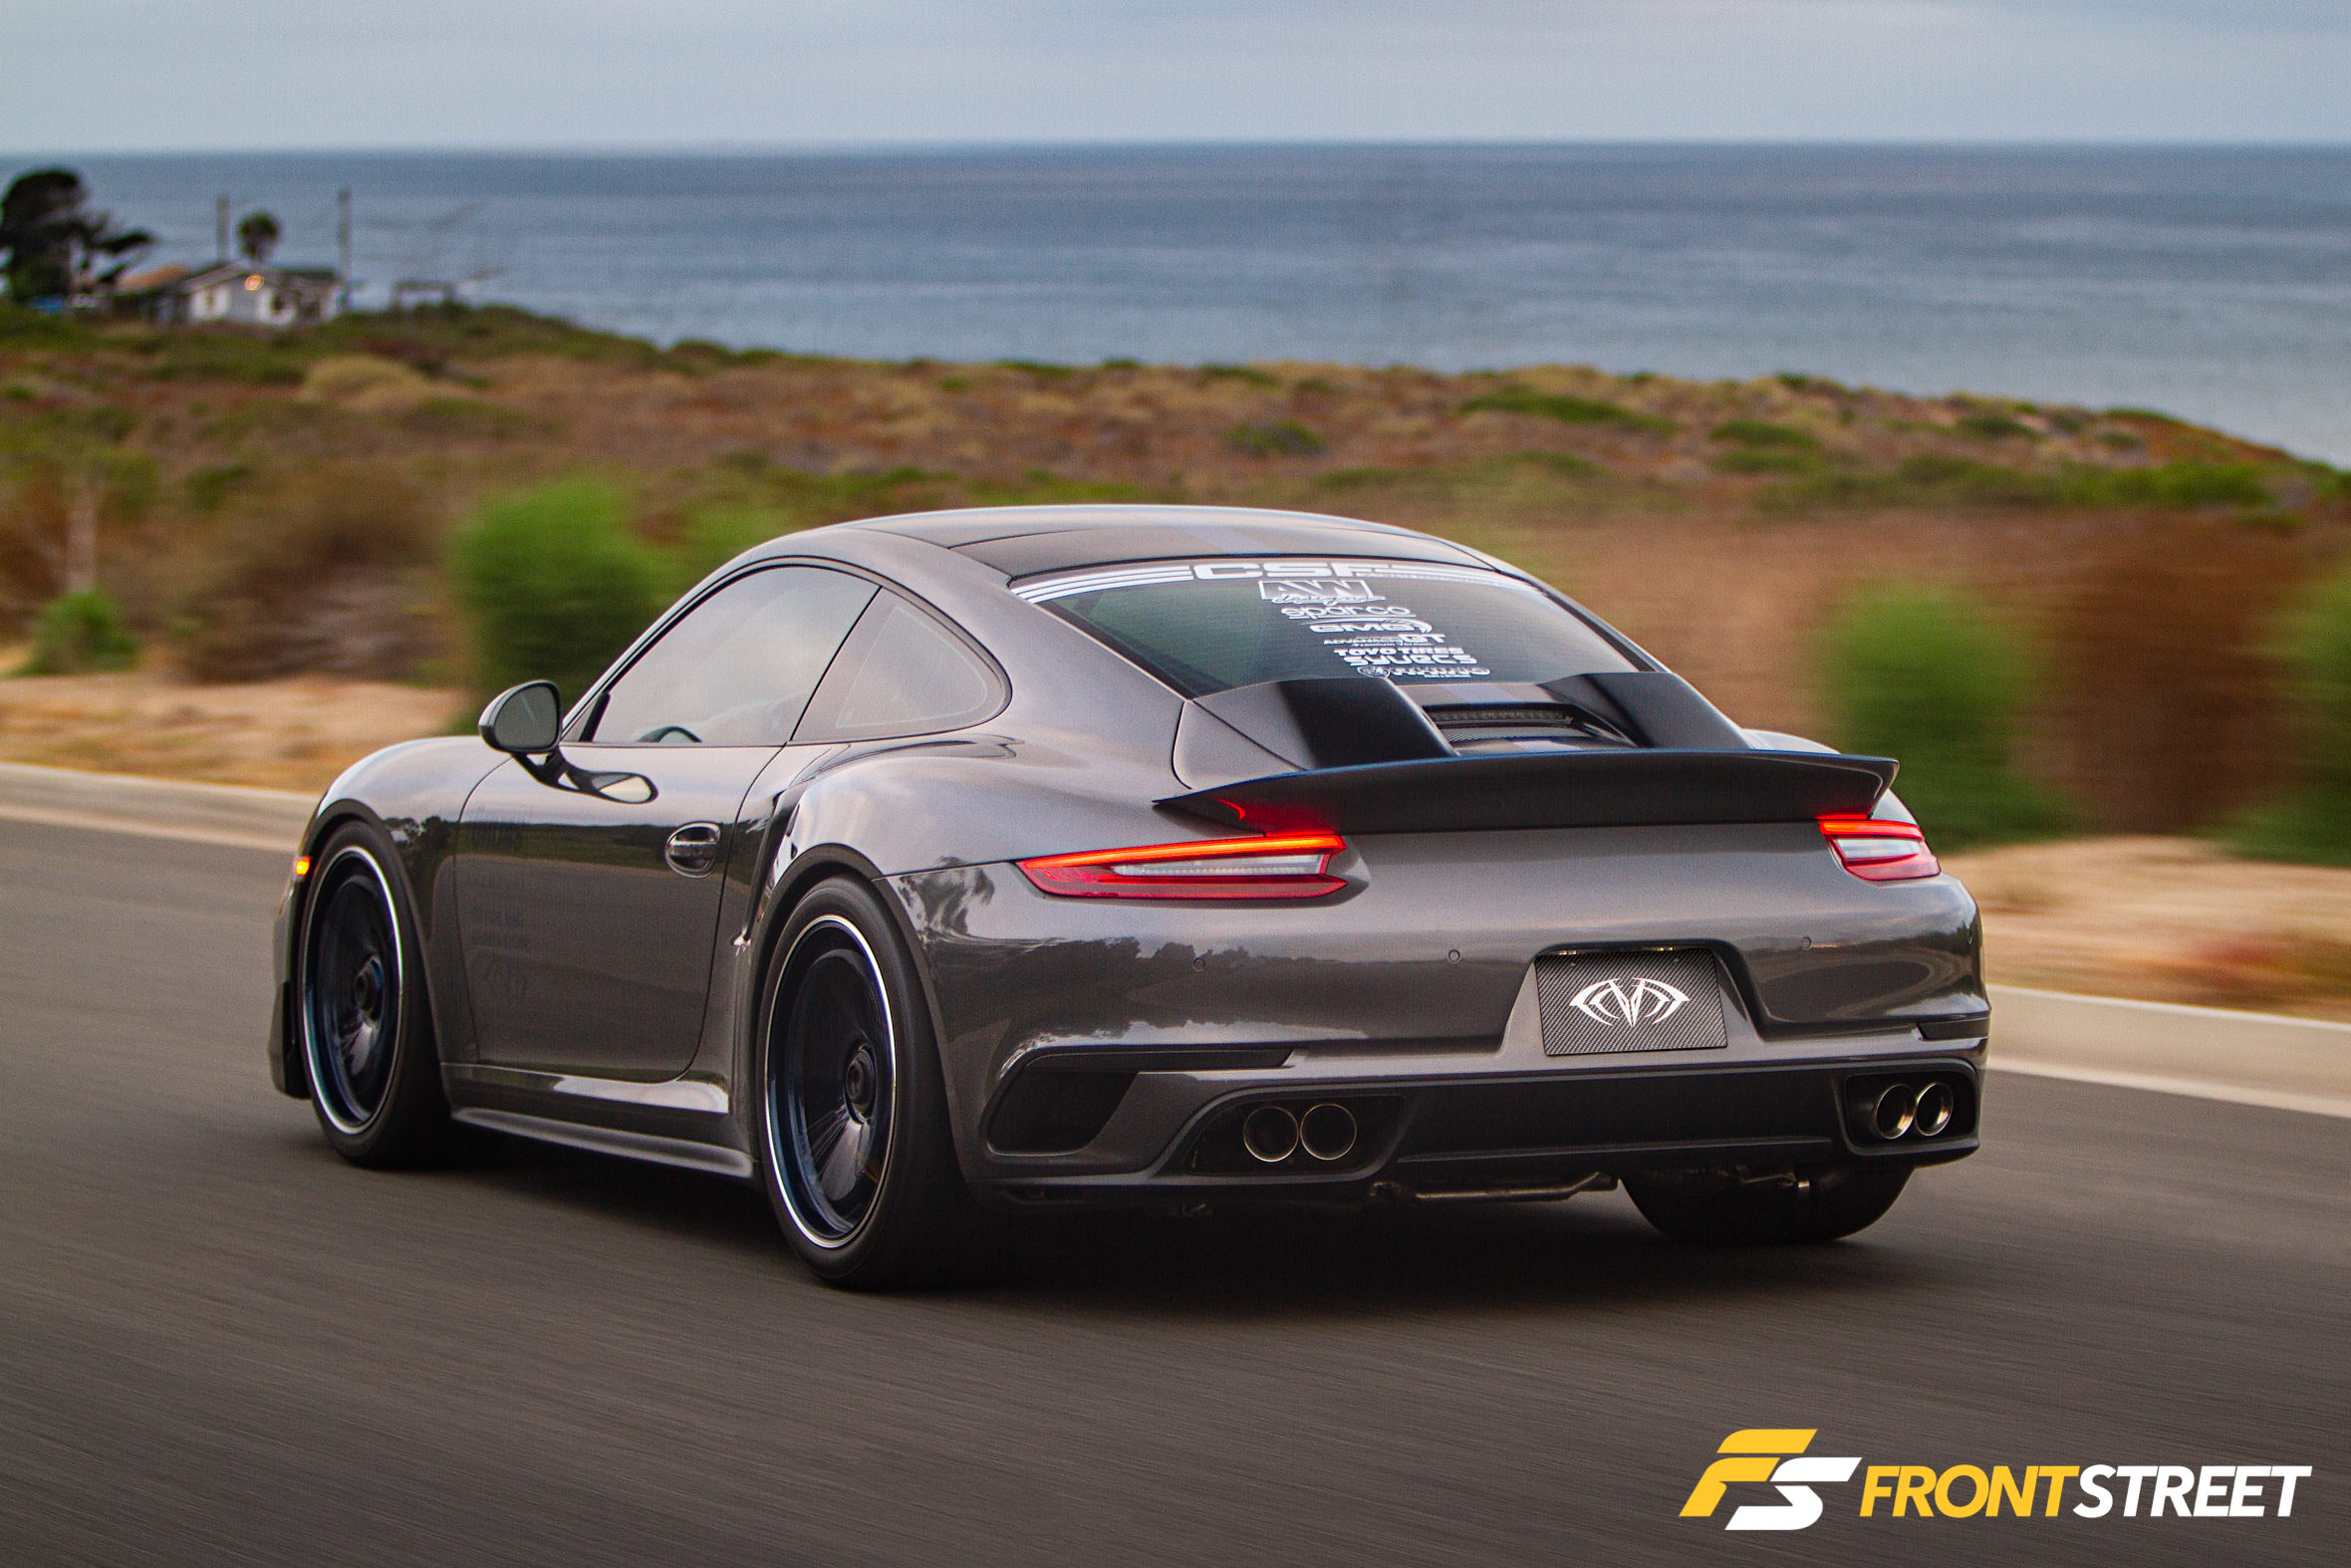 This 2014 Porsche 911 Turbo S Takes Care Of Unfinished Business